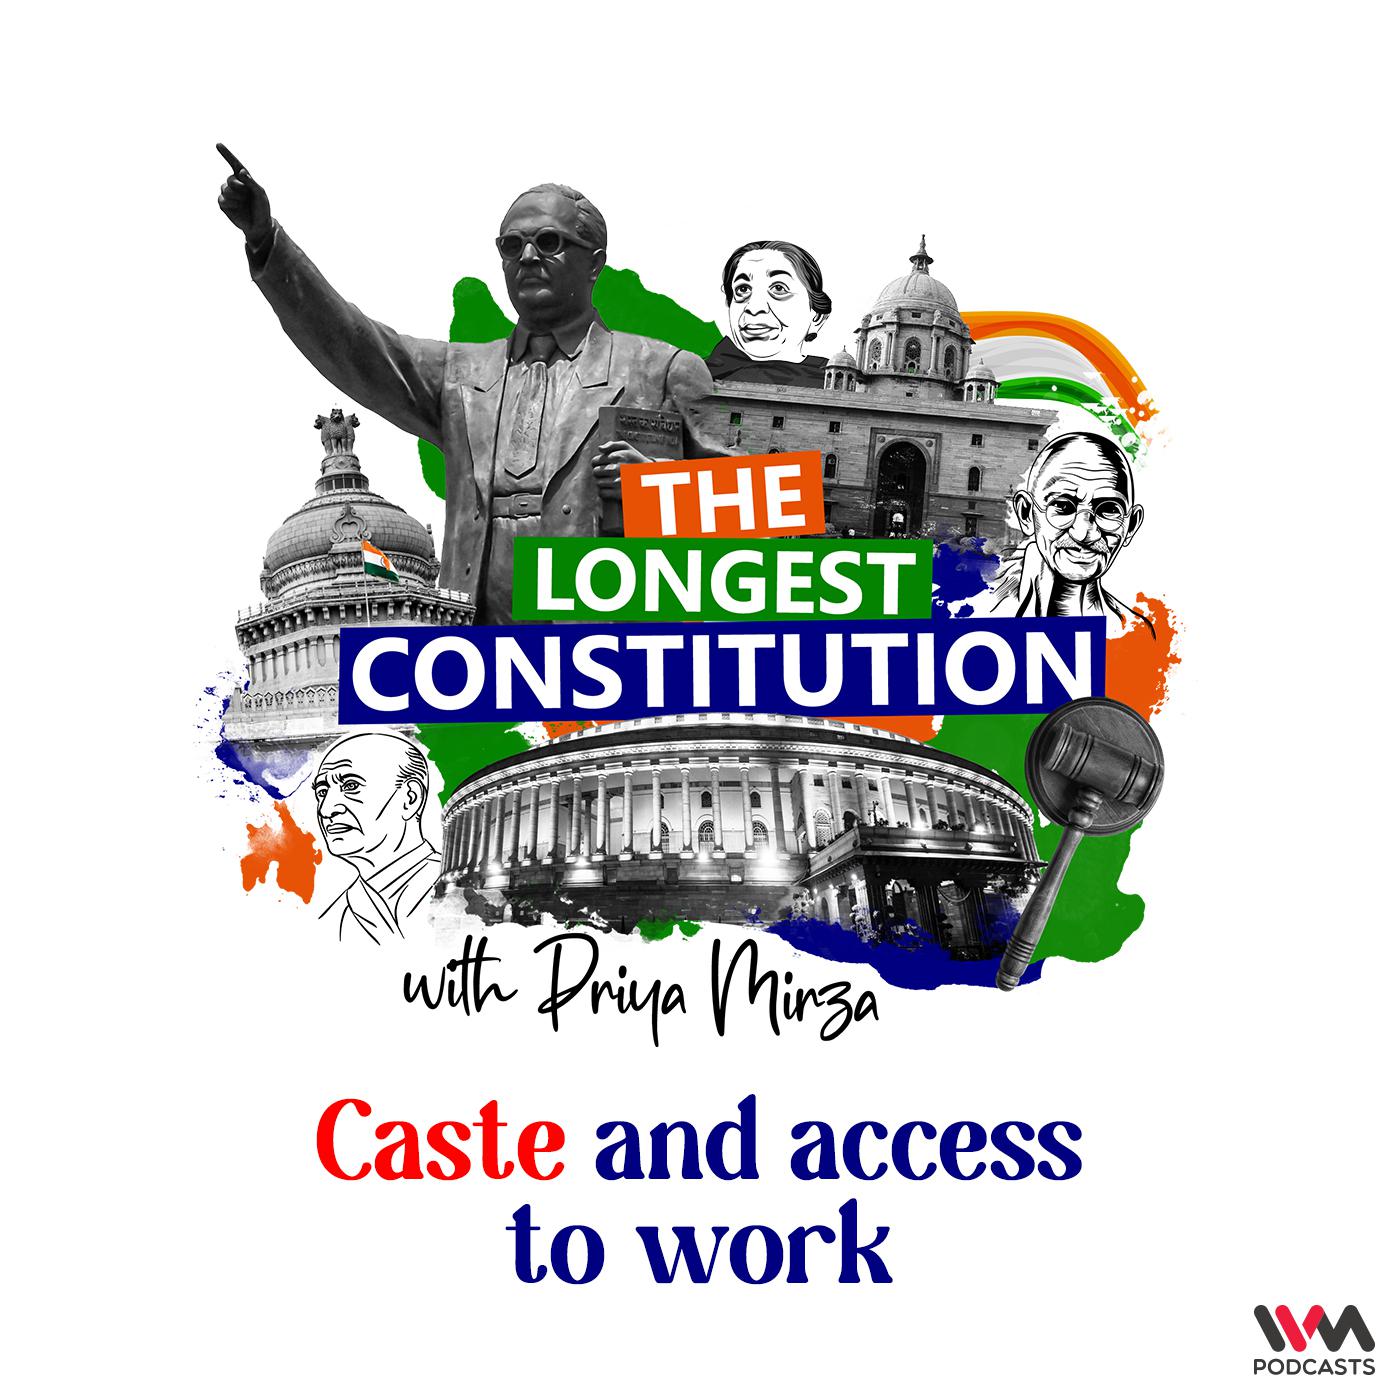 Caste and access to work